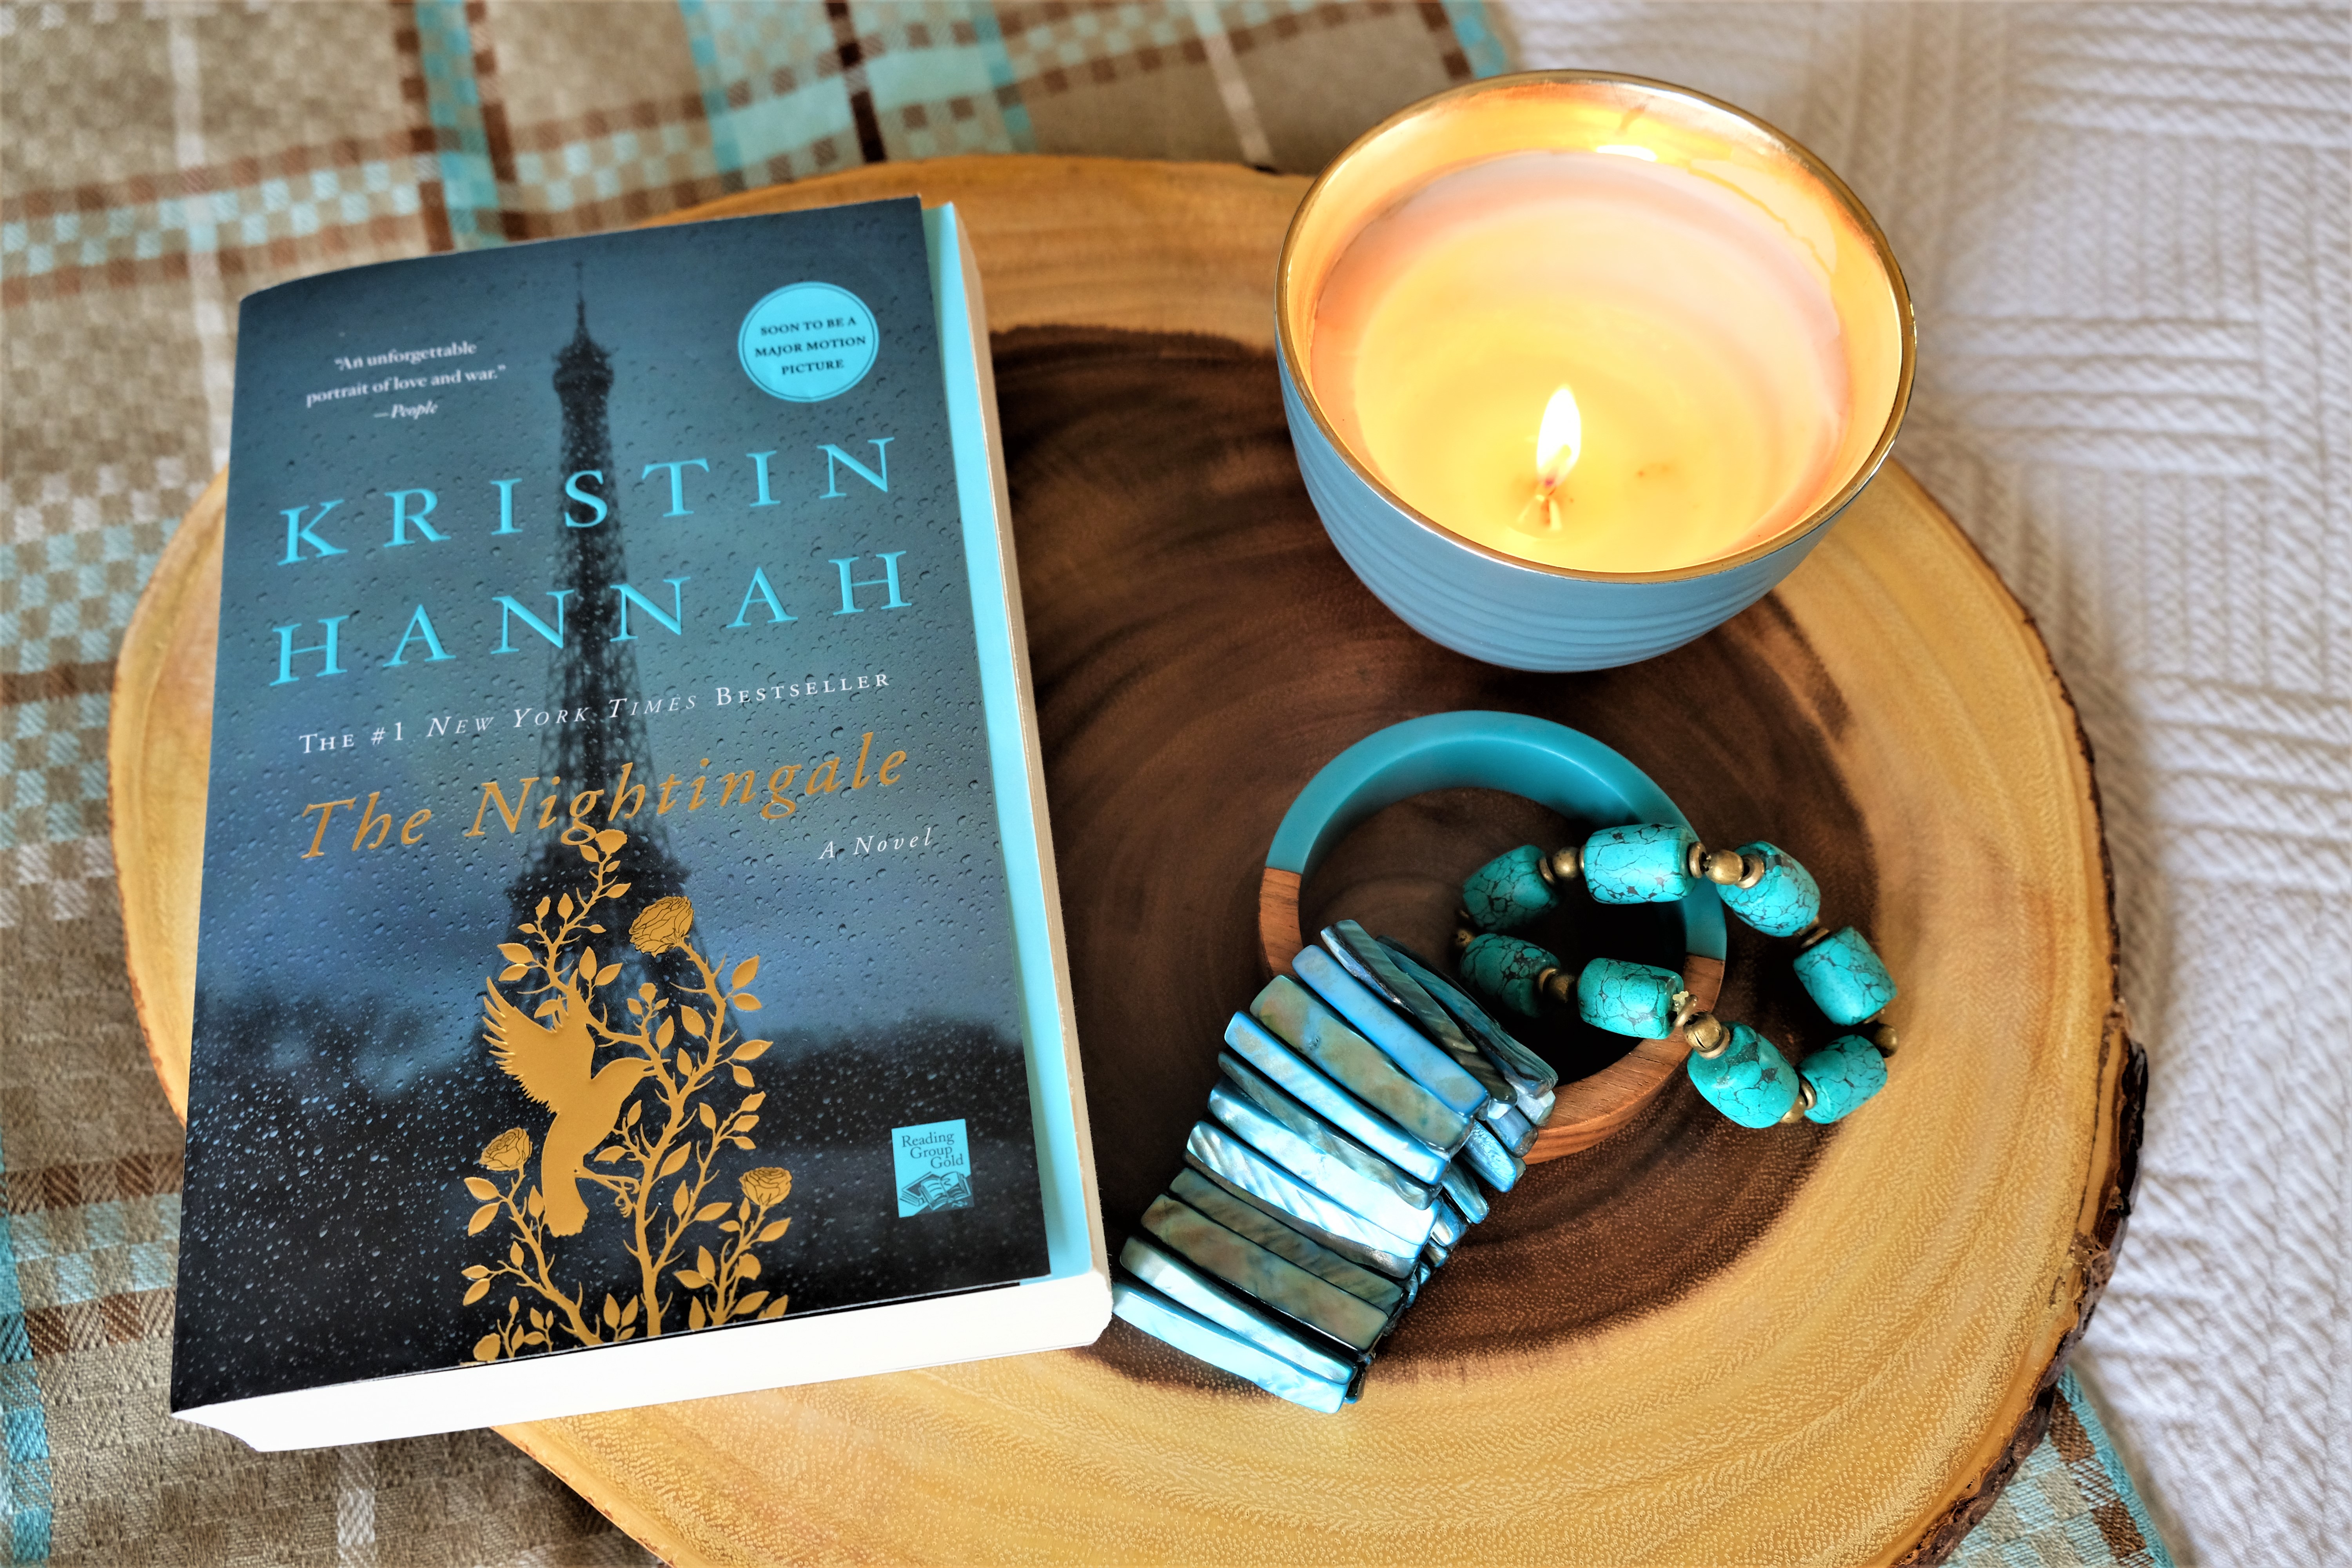 The book is The Nightingale by Kristen Hannah placed on a wooden board with an accessory of a candle and some bracelets